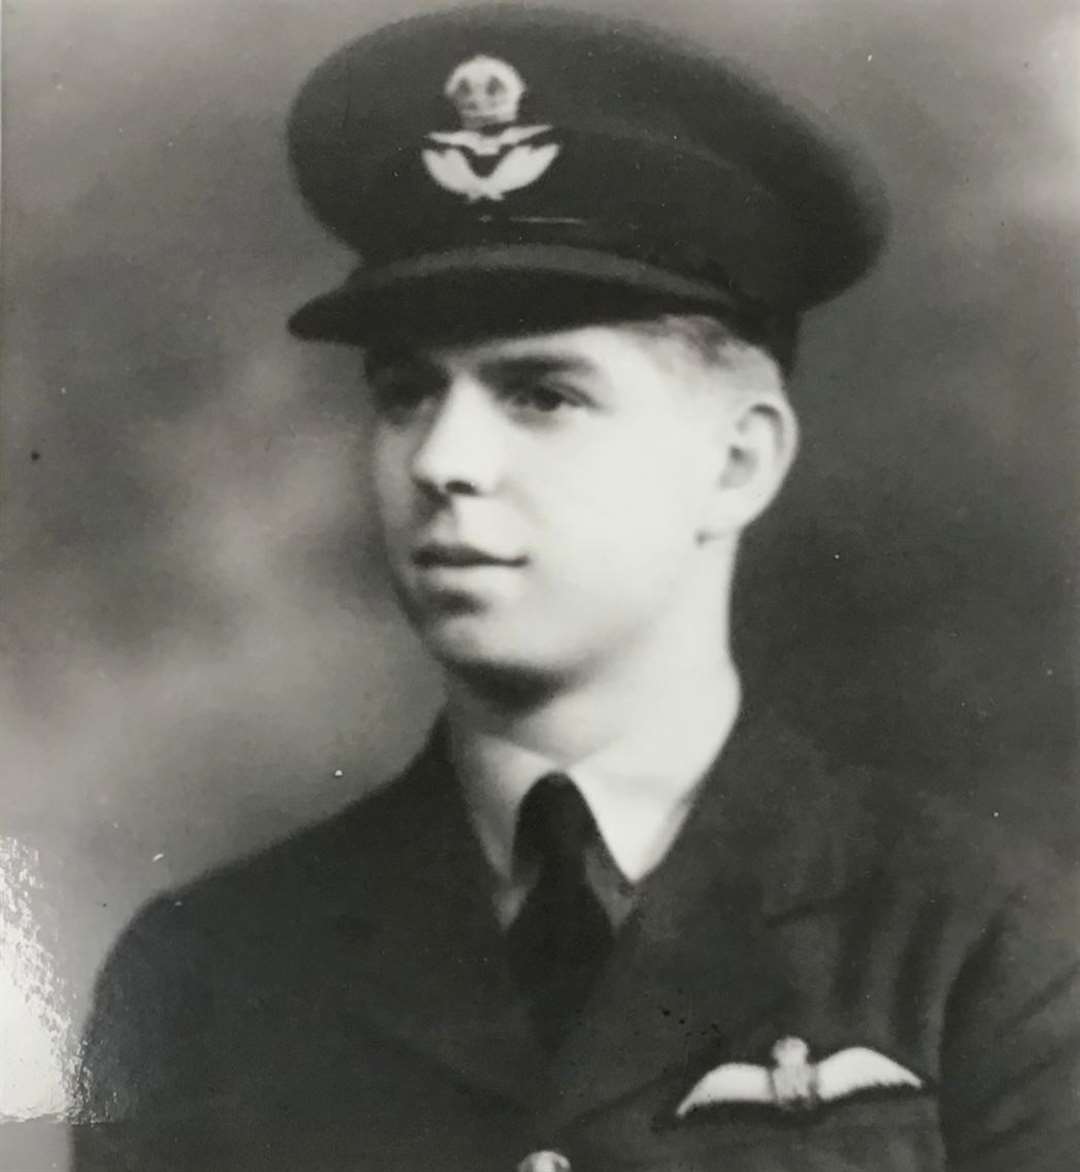 Pilot Officer Colin Francis was just 19